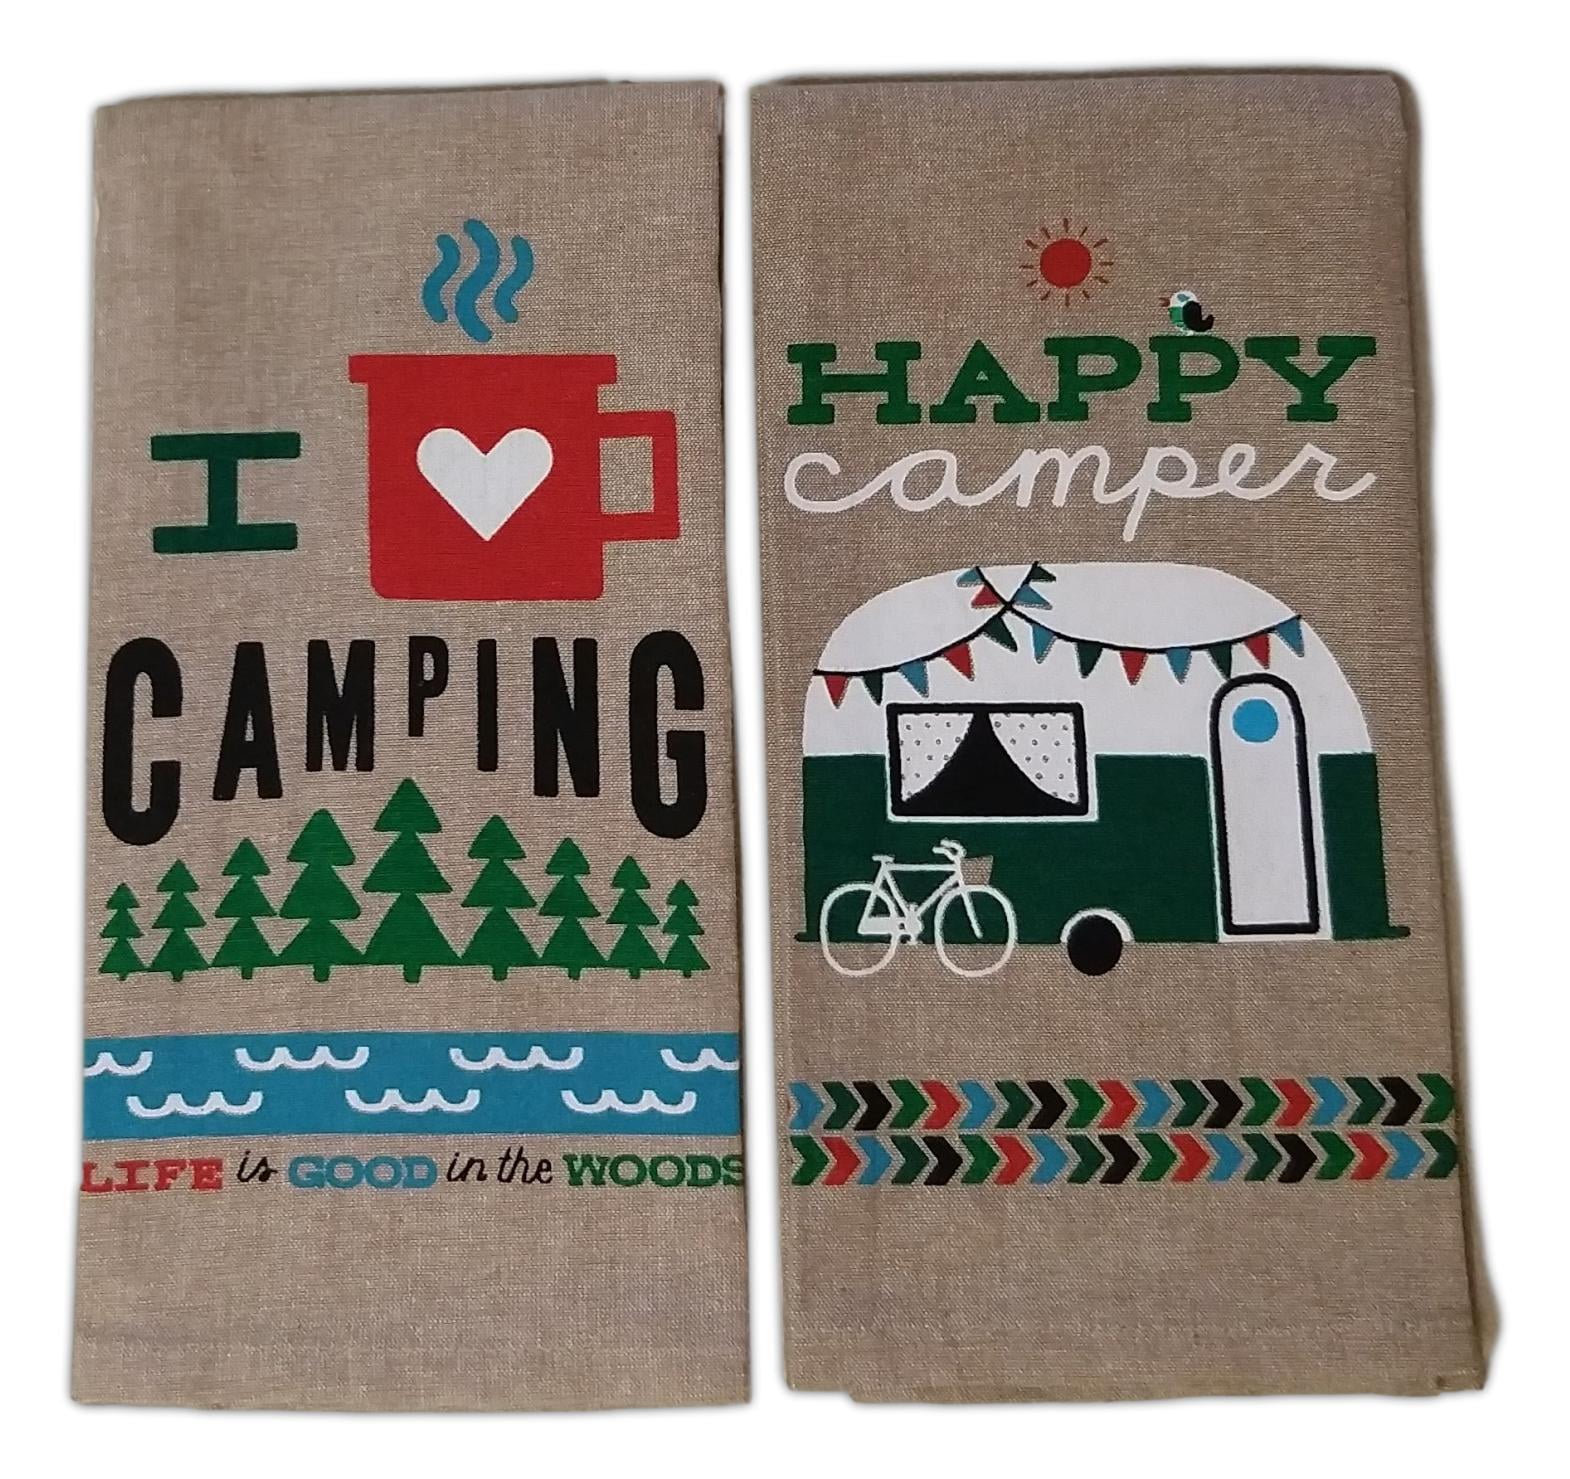 I HEART CAMPING & HAPPY CAMPER Set of 2 Kitchen Tea Towels by Kay Dee